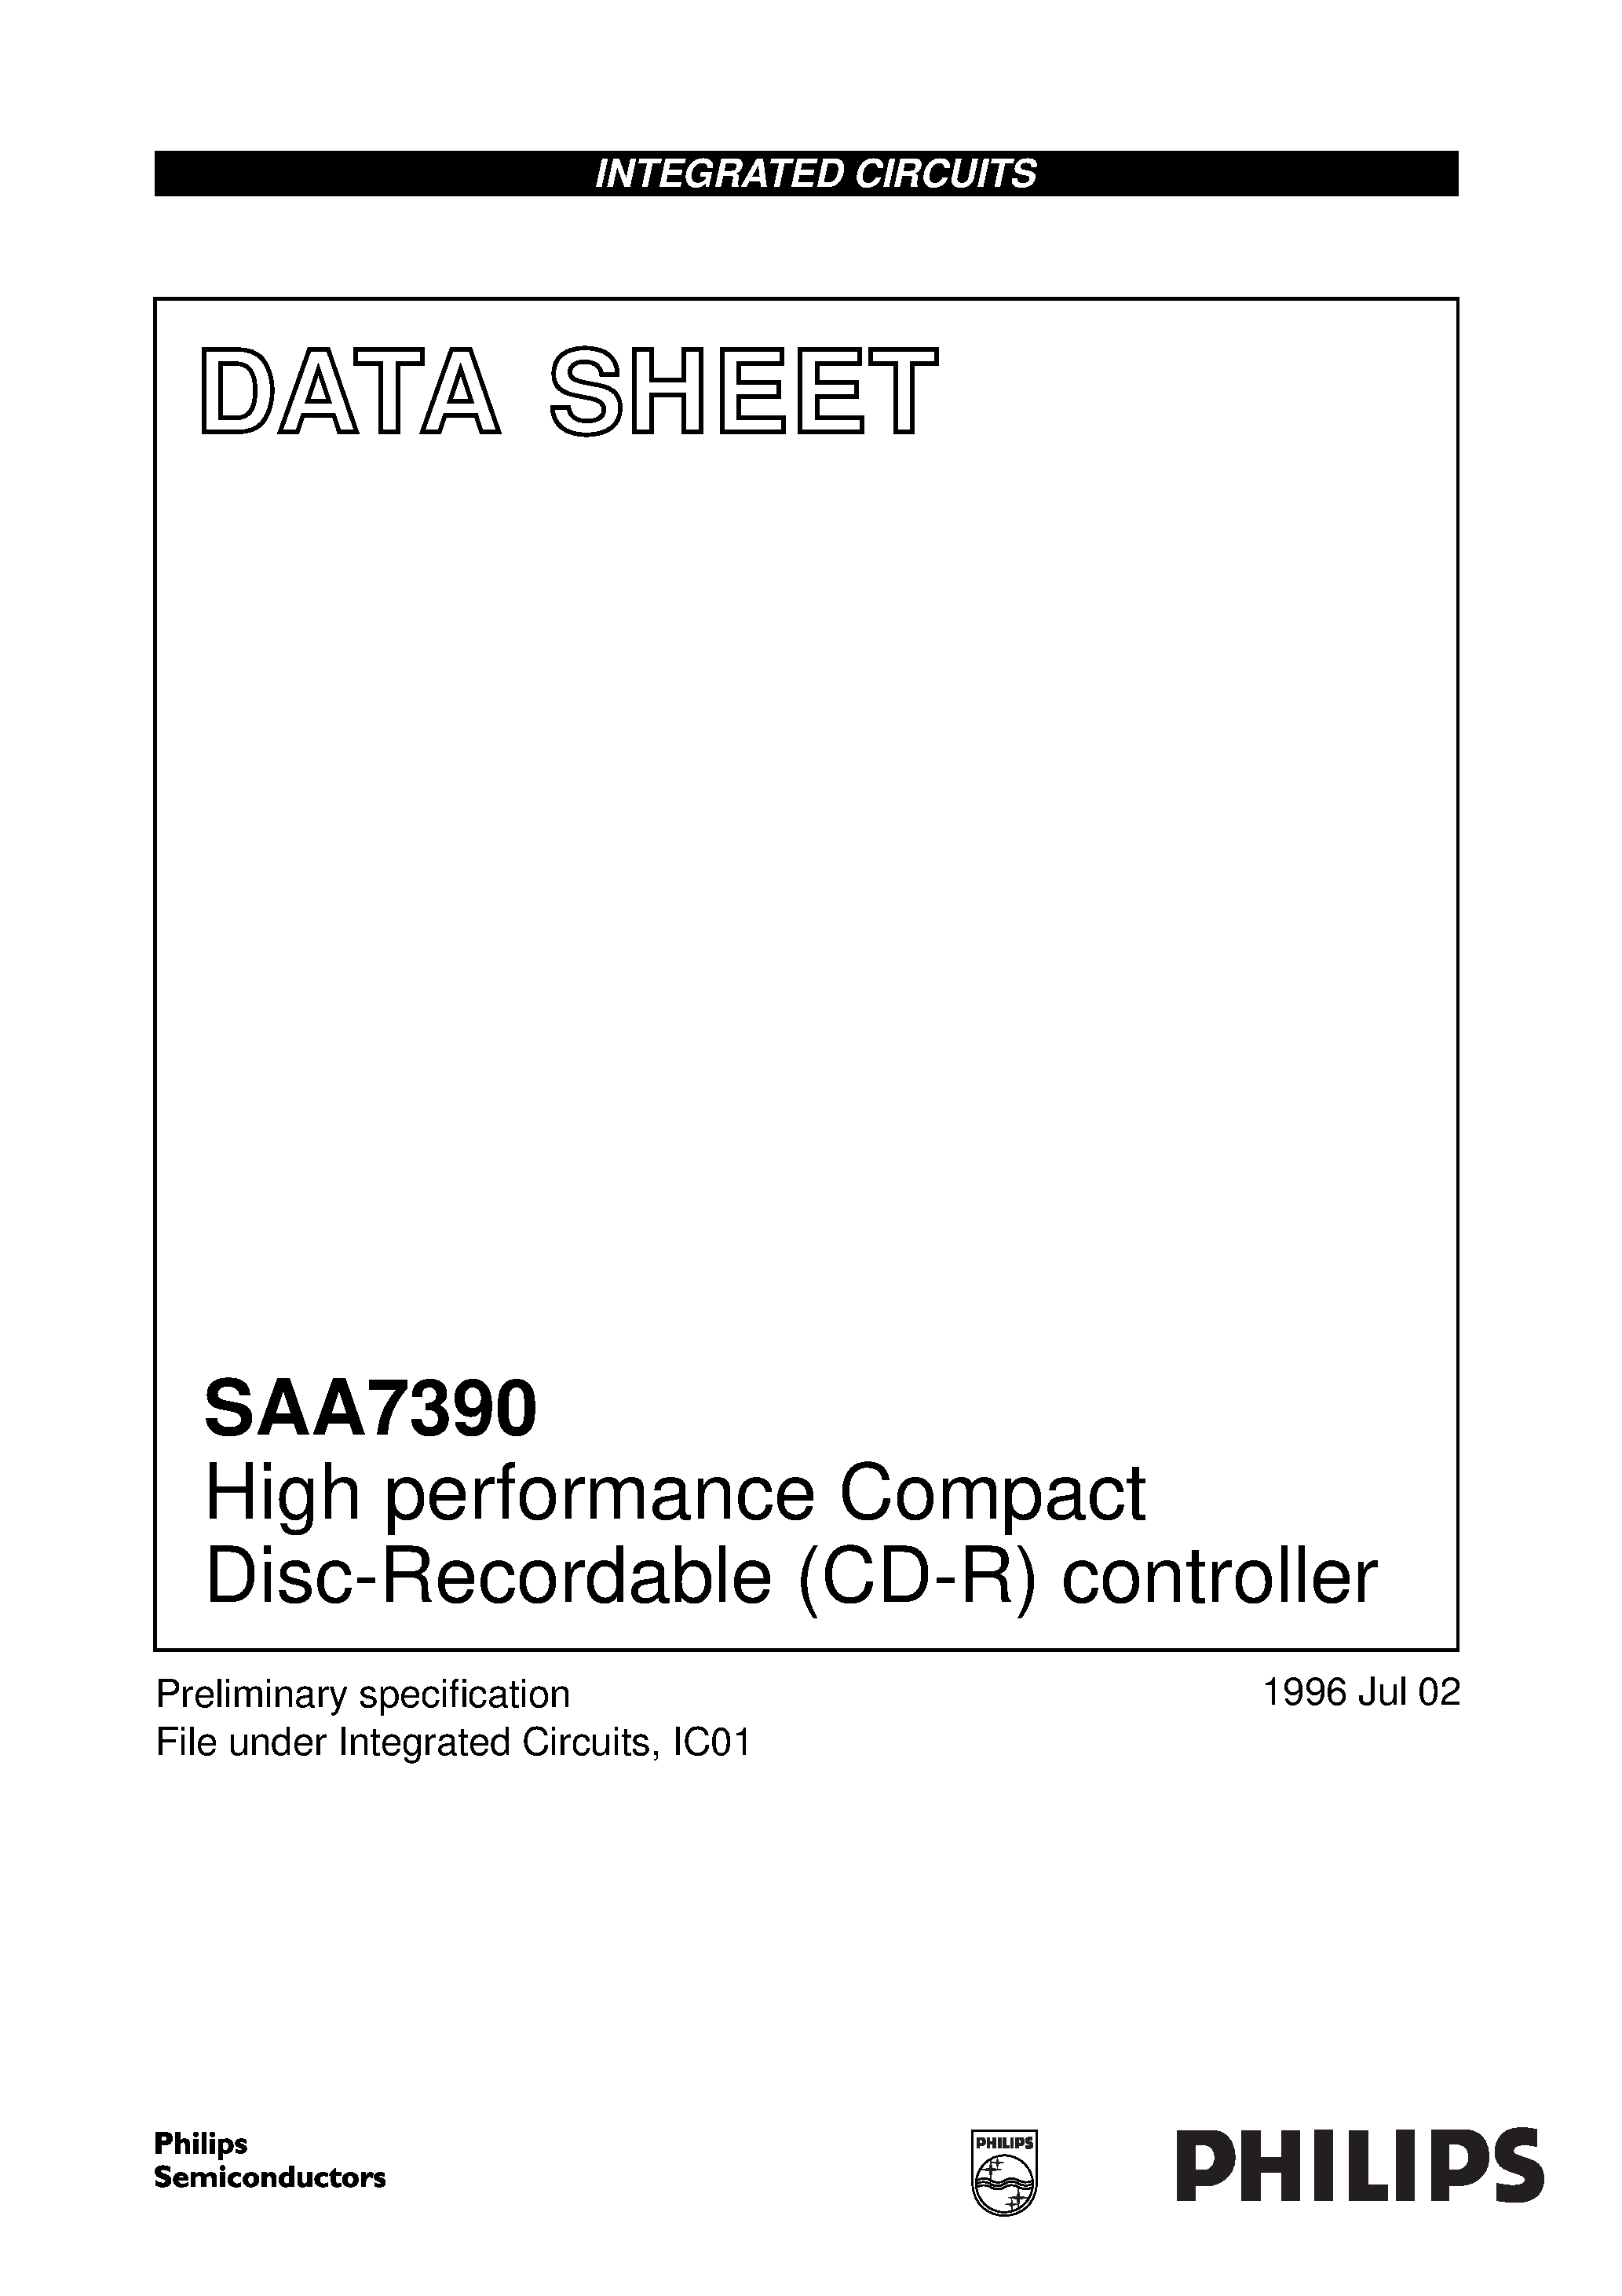 Даташит SAA7390 - High performance Compact Disc-Recordable CD-R controller страница 1